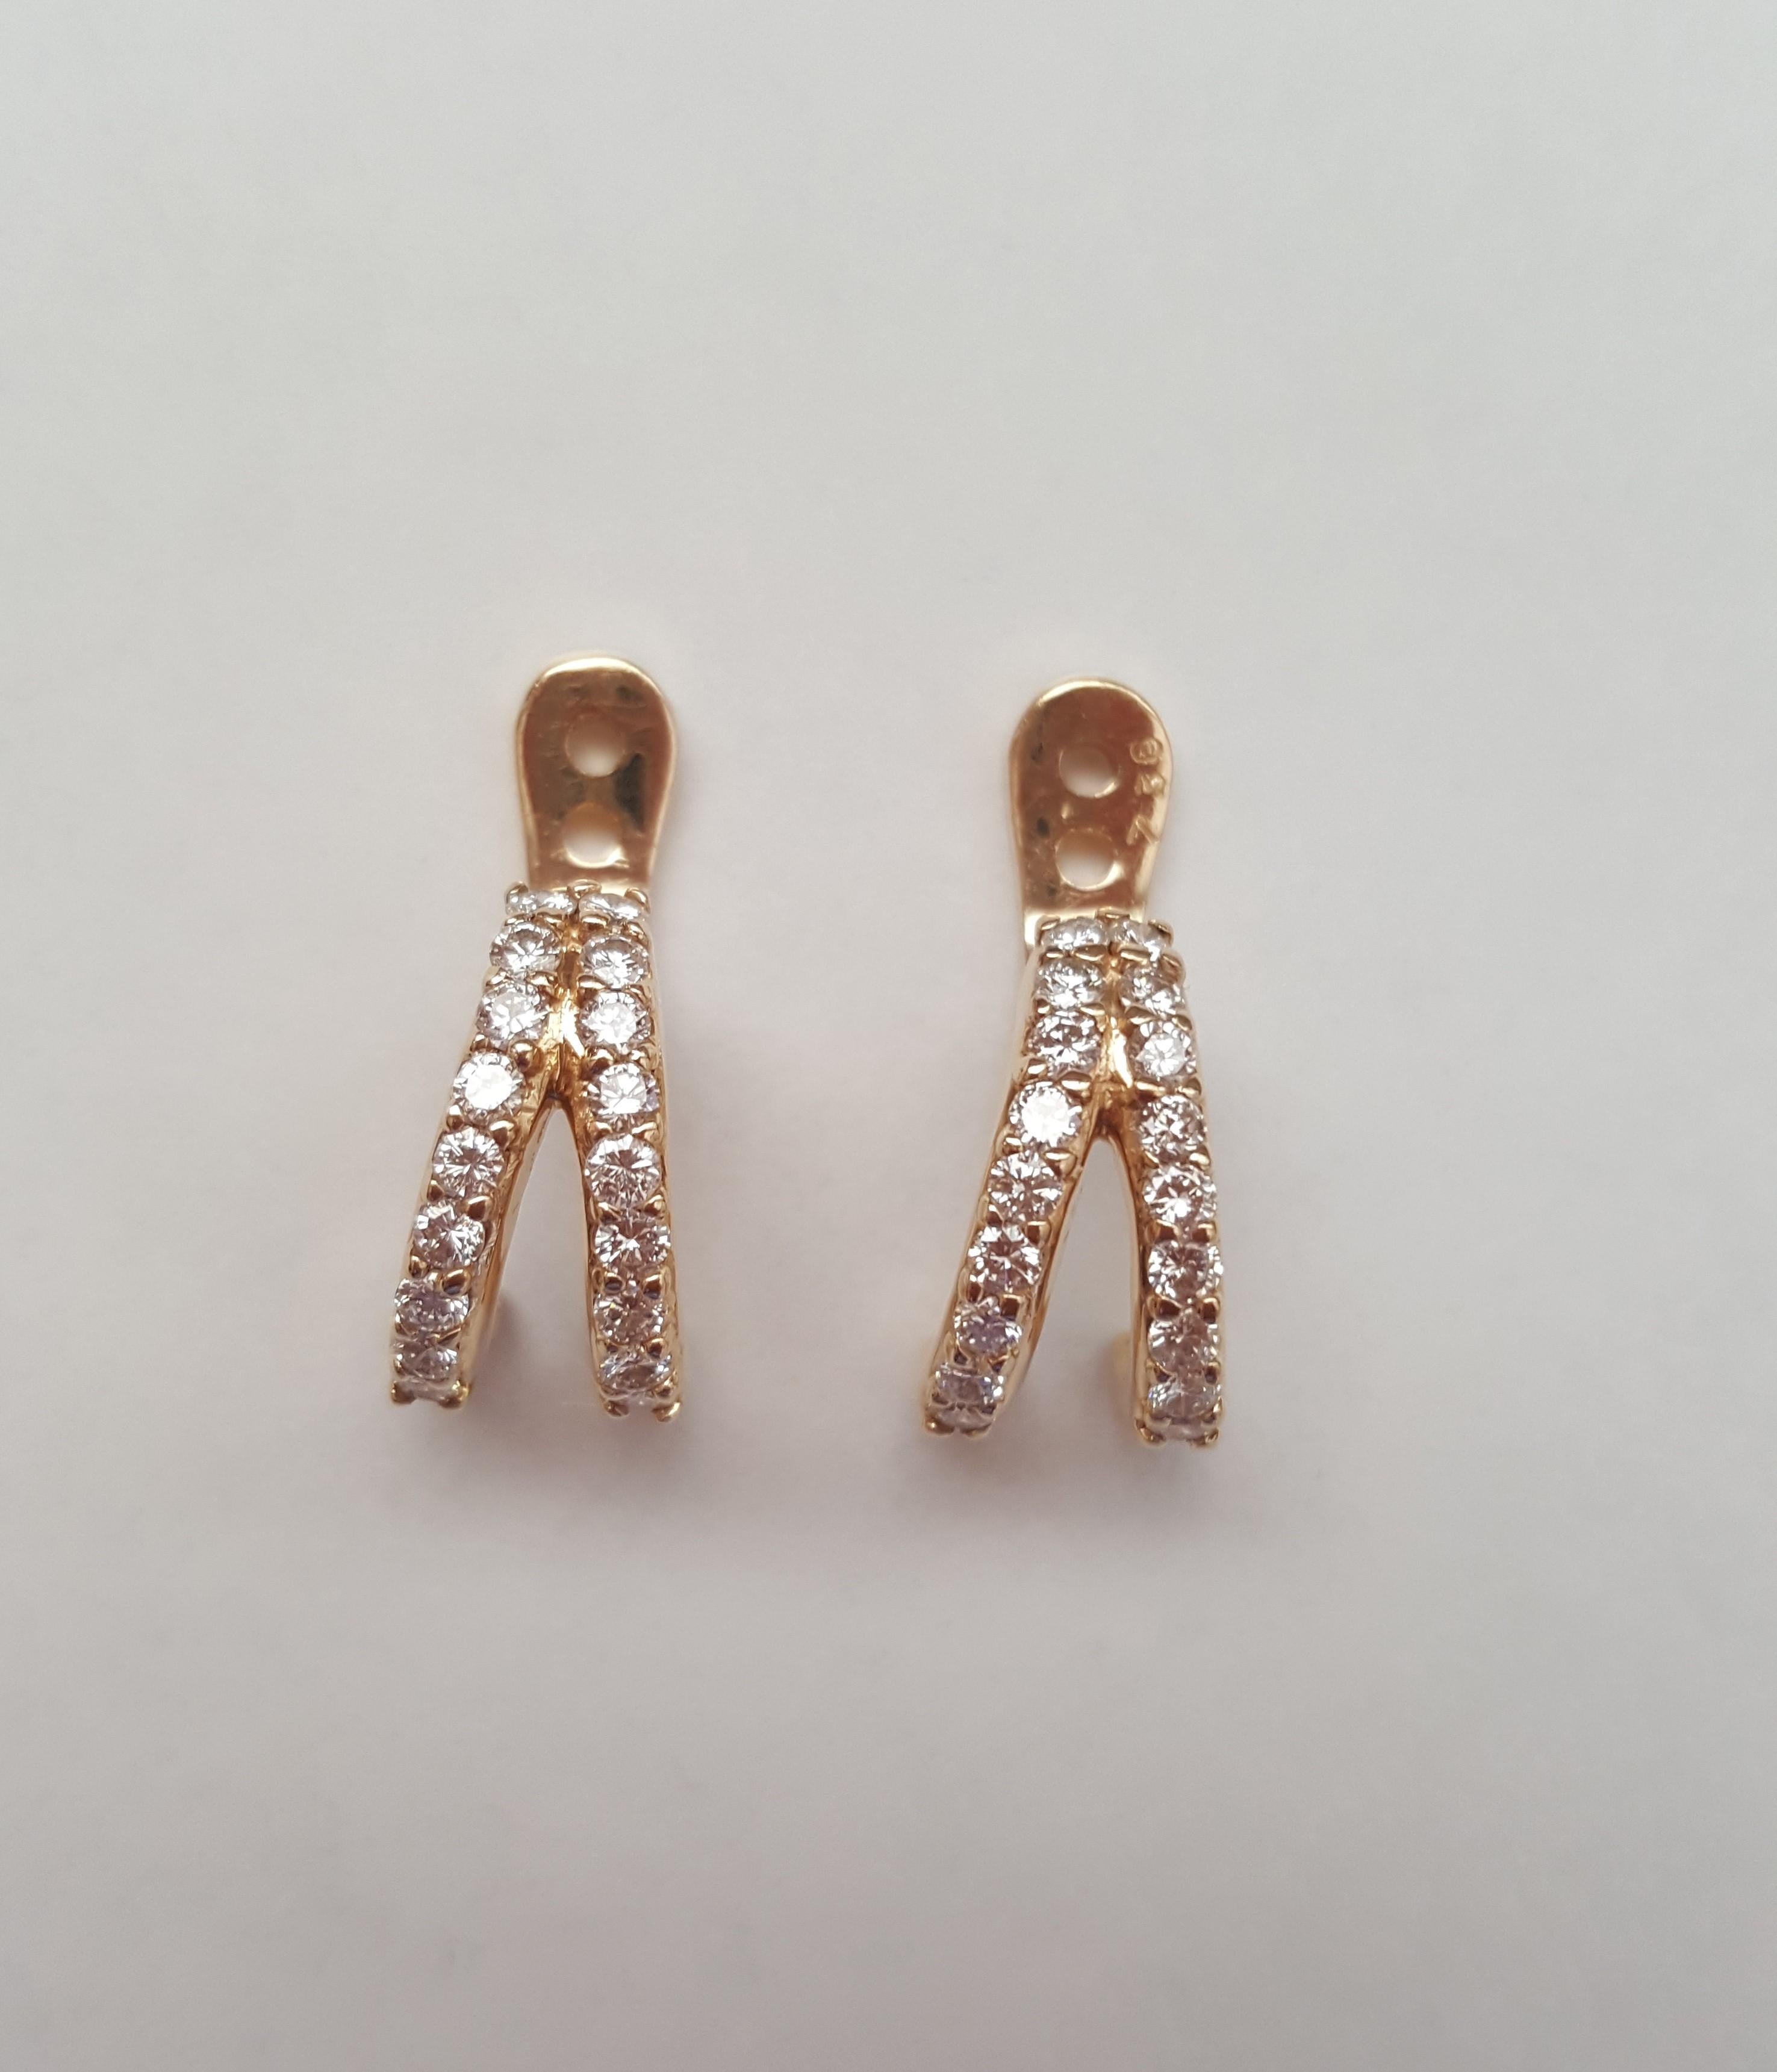 14kt Yellow Gold Diamond Earring Jackets, 6.1 grams weight, 39 round brilliant diamonds of approx. 1.50cttw., Earring Jacket ONLY, 22mm Long and 8.8mm tapering to 3.9mm in width. These earring jacket are sold separately from the diamond studs used